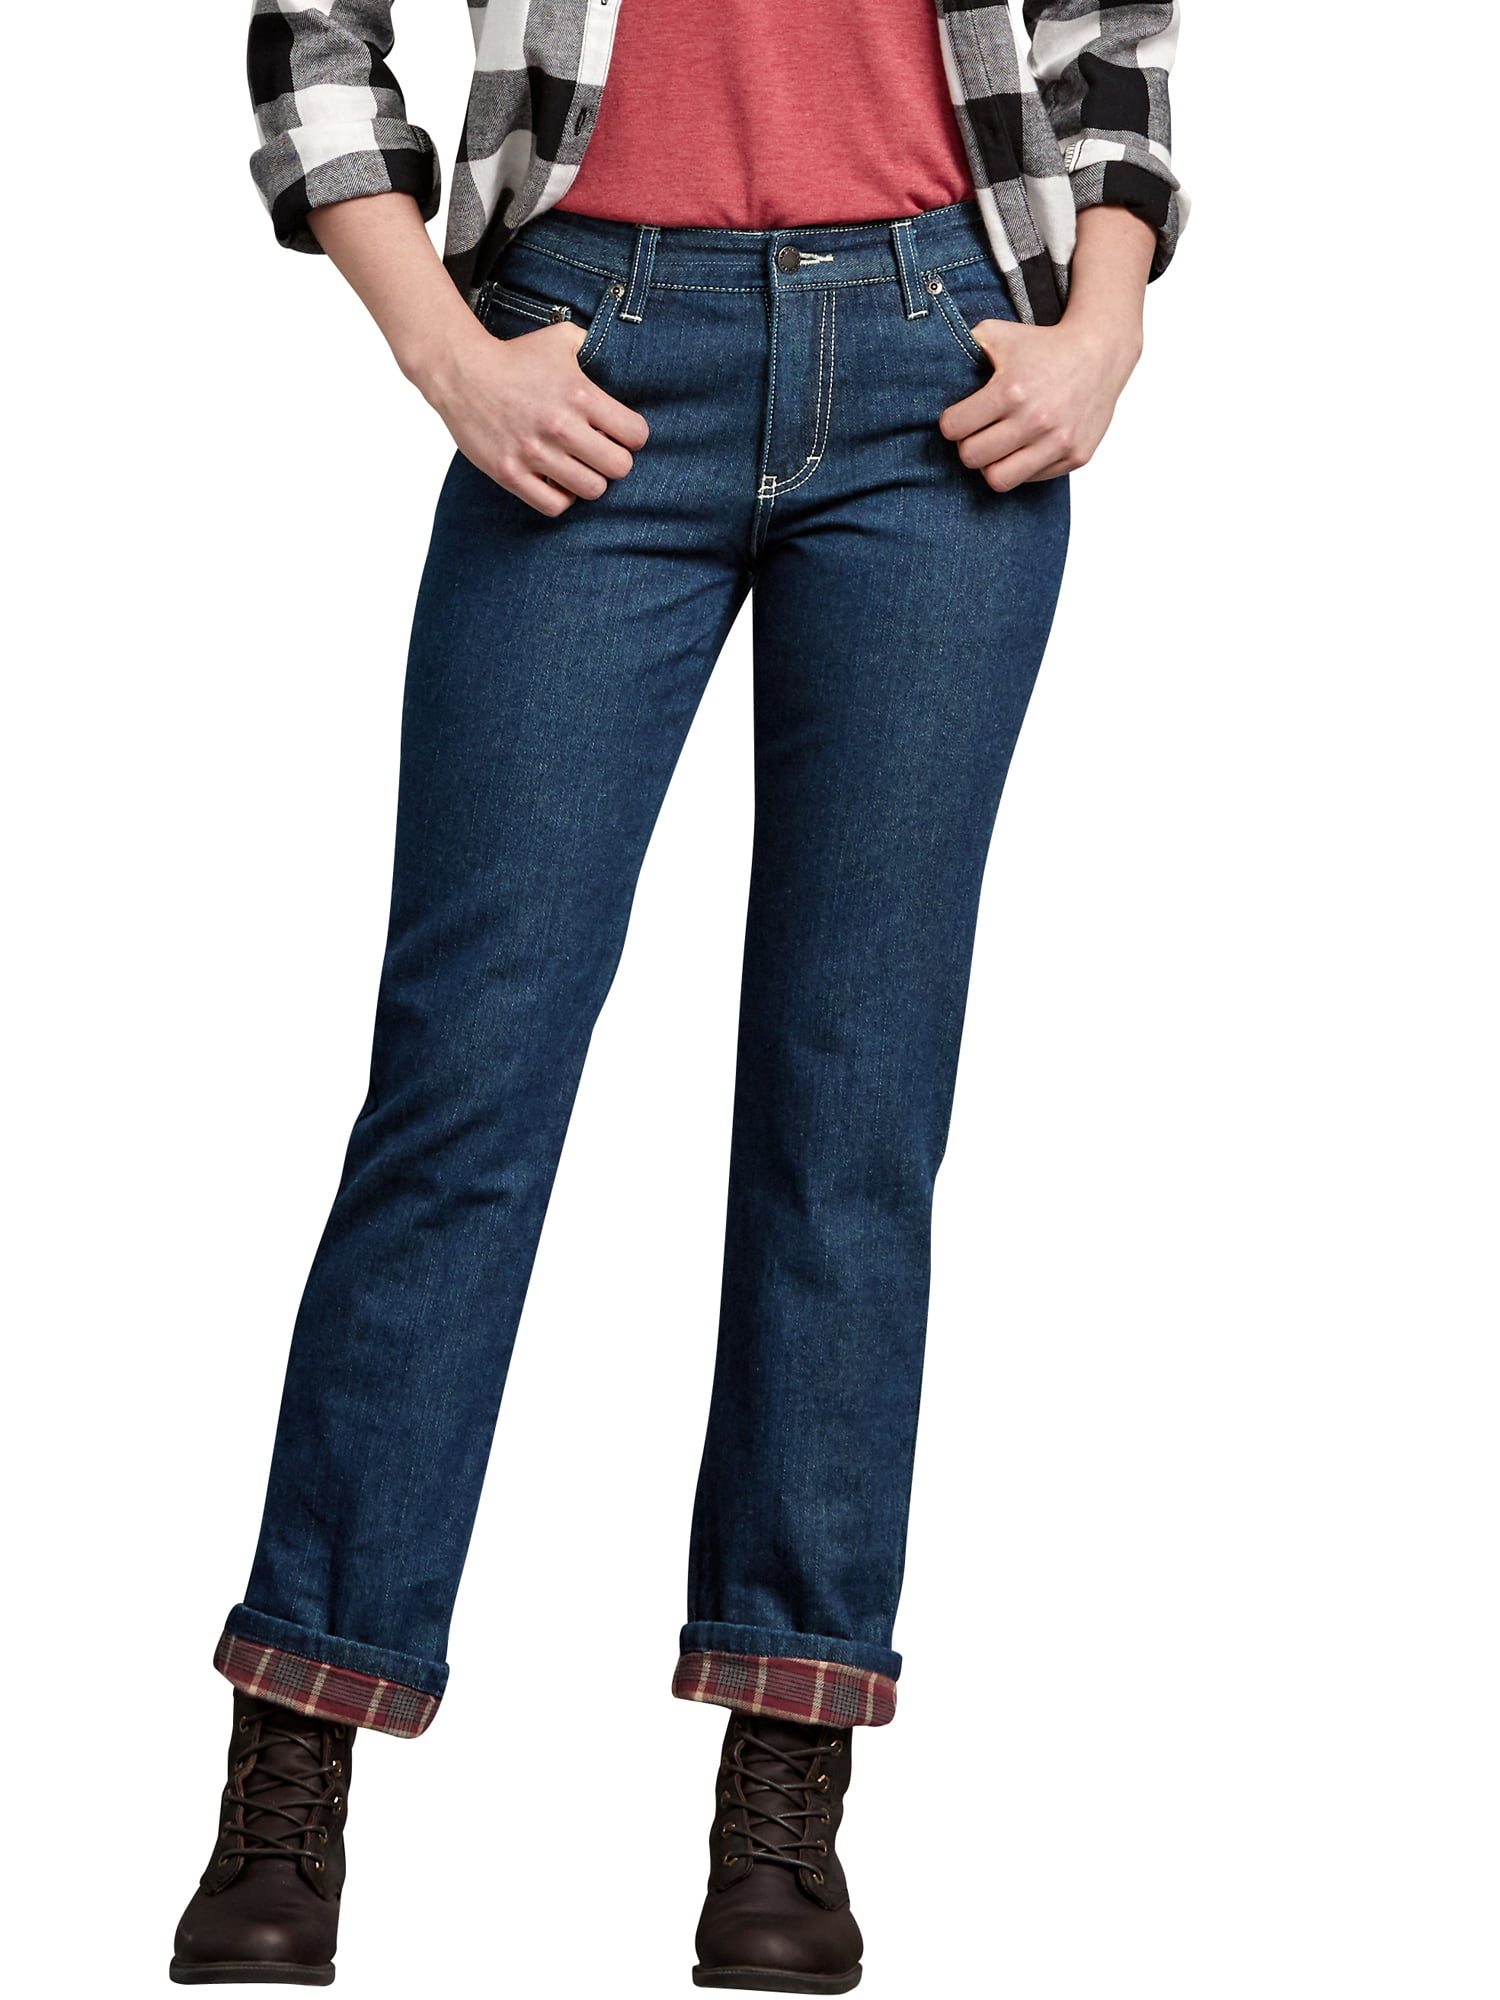 heroin Hollow hane Dickies Women's Relaxed Fit Straight Leg Flannel Lined Denim Jeans -  Walmart.com